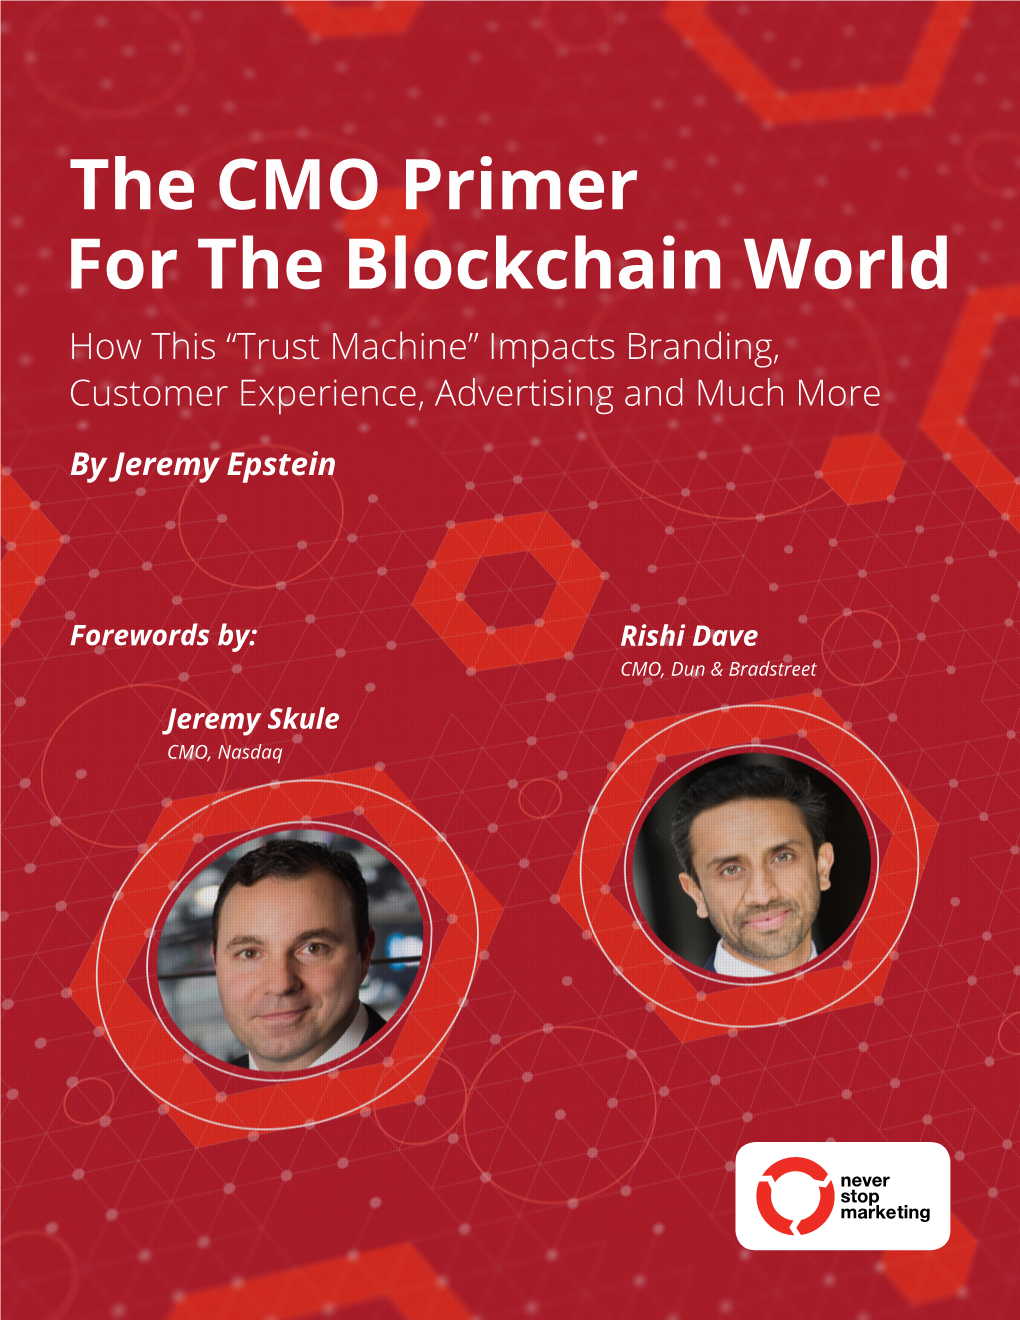 The CMO Primer for the Blockchain World How This “Trust Machine” Impacts Branding, Customer Experience, Advertising and Much More